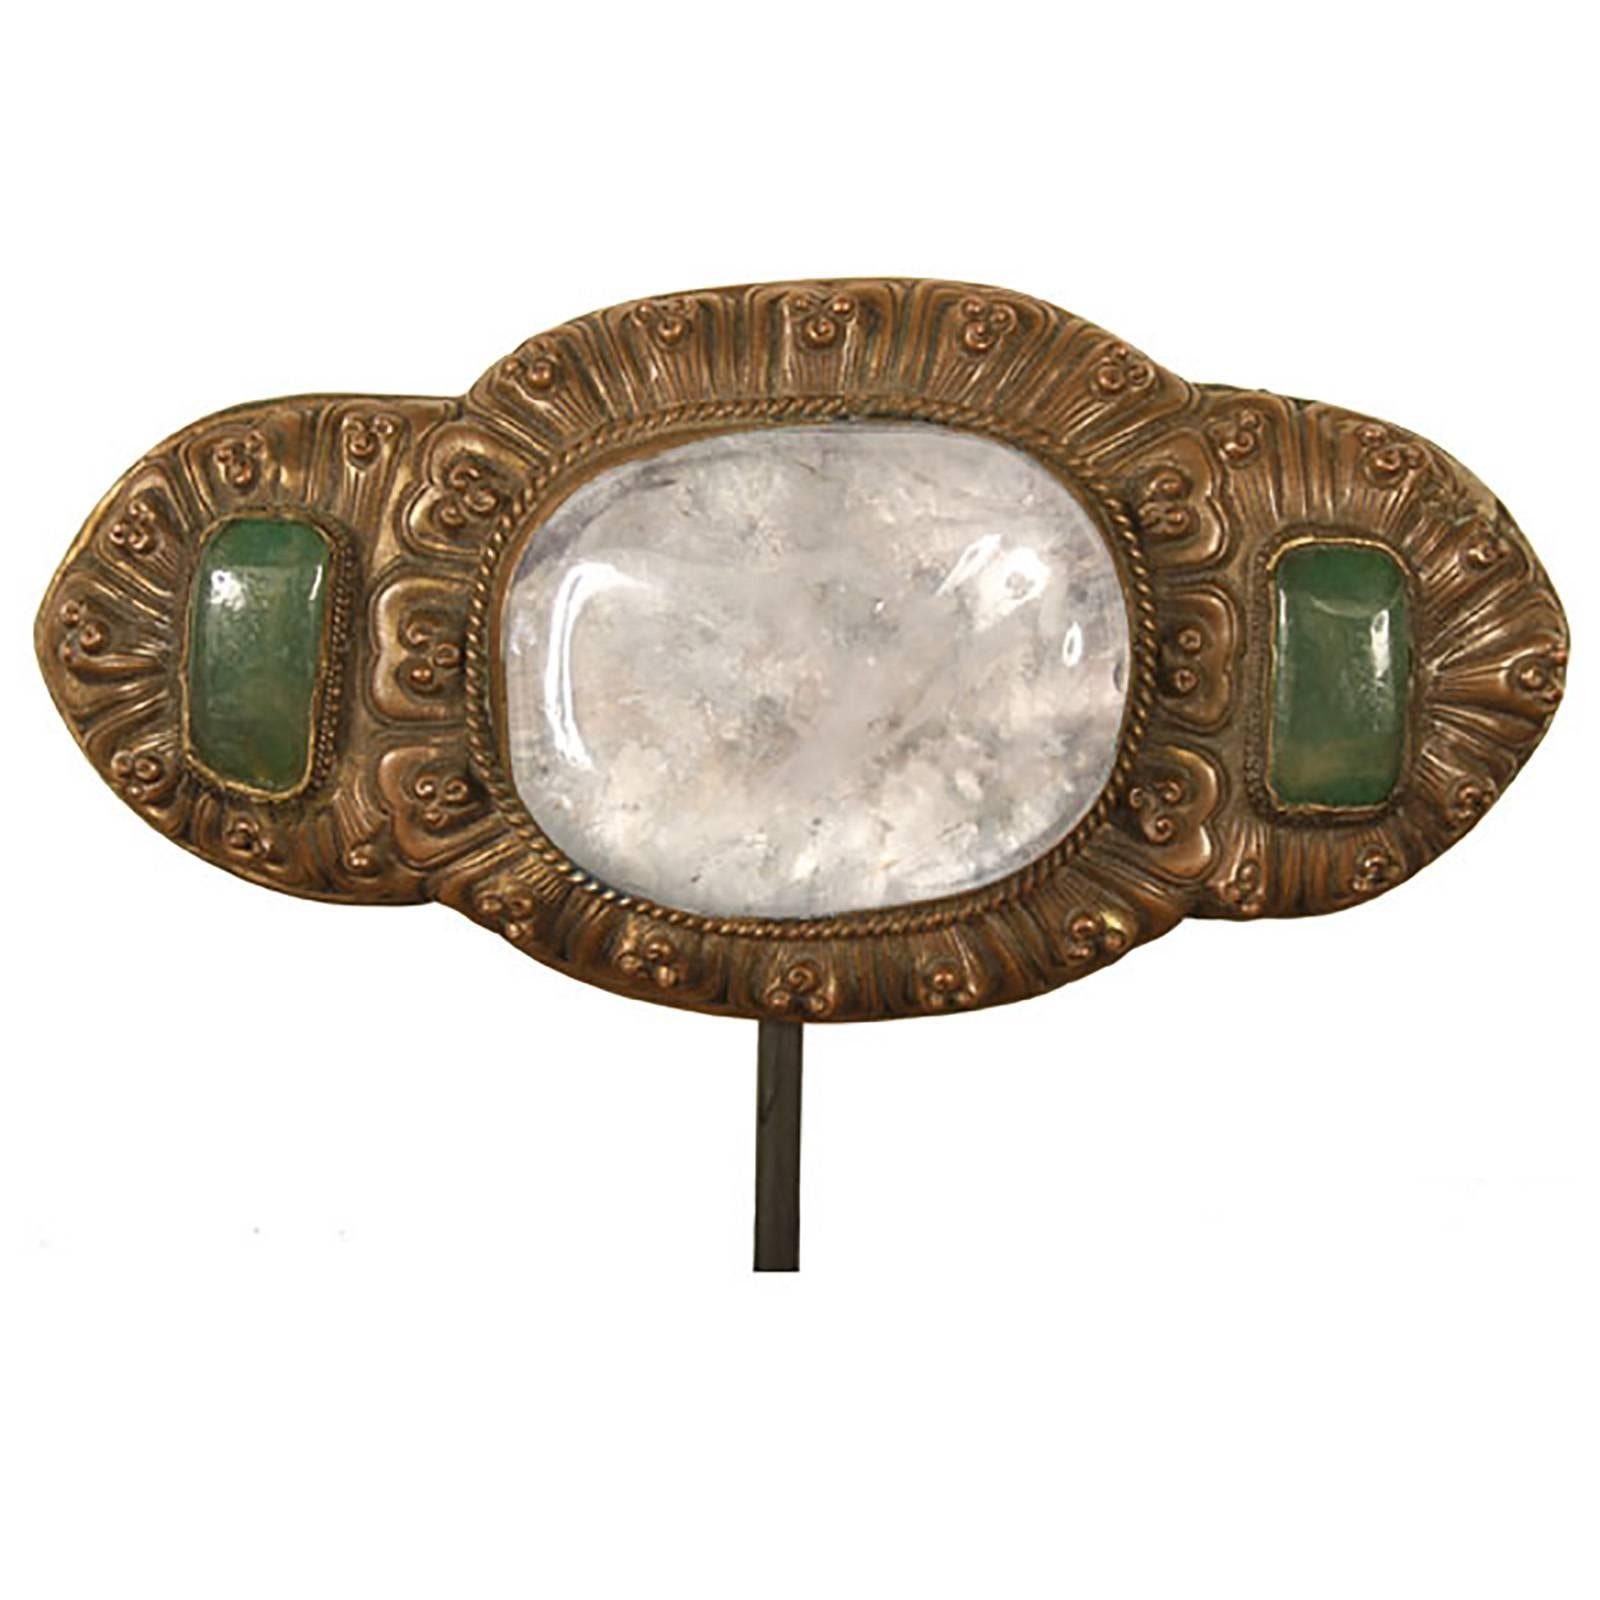 This 19th century Chinese belt buckle features an exceptional specimen of rock crystal flanked by two jade cabochons. The 19th century was an interesting period for fashion. Eastern and Western designers were influencing one another, and this buckle